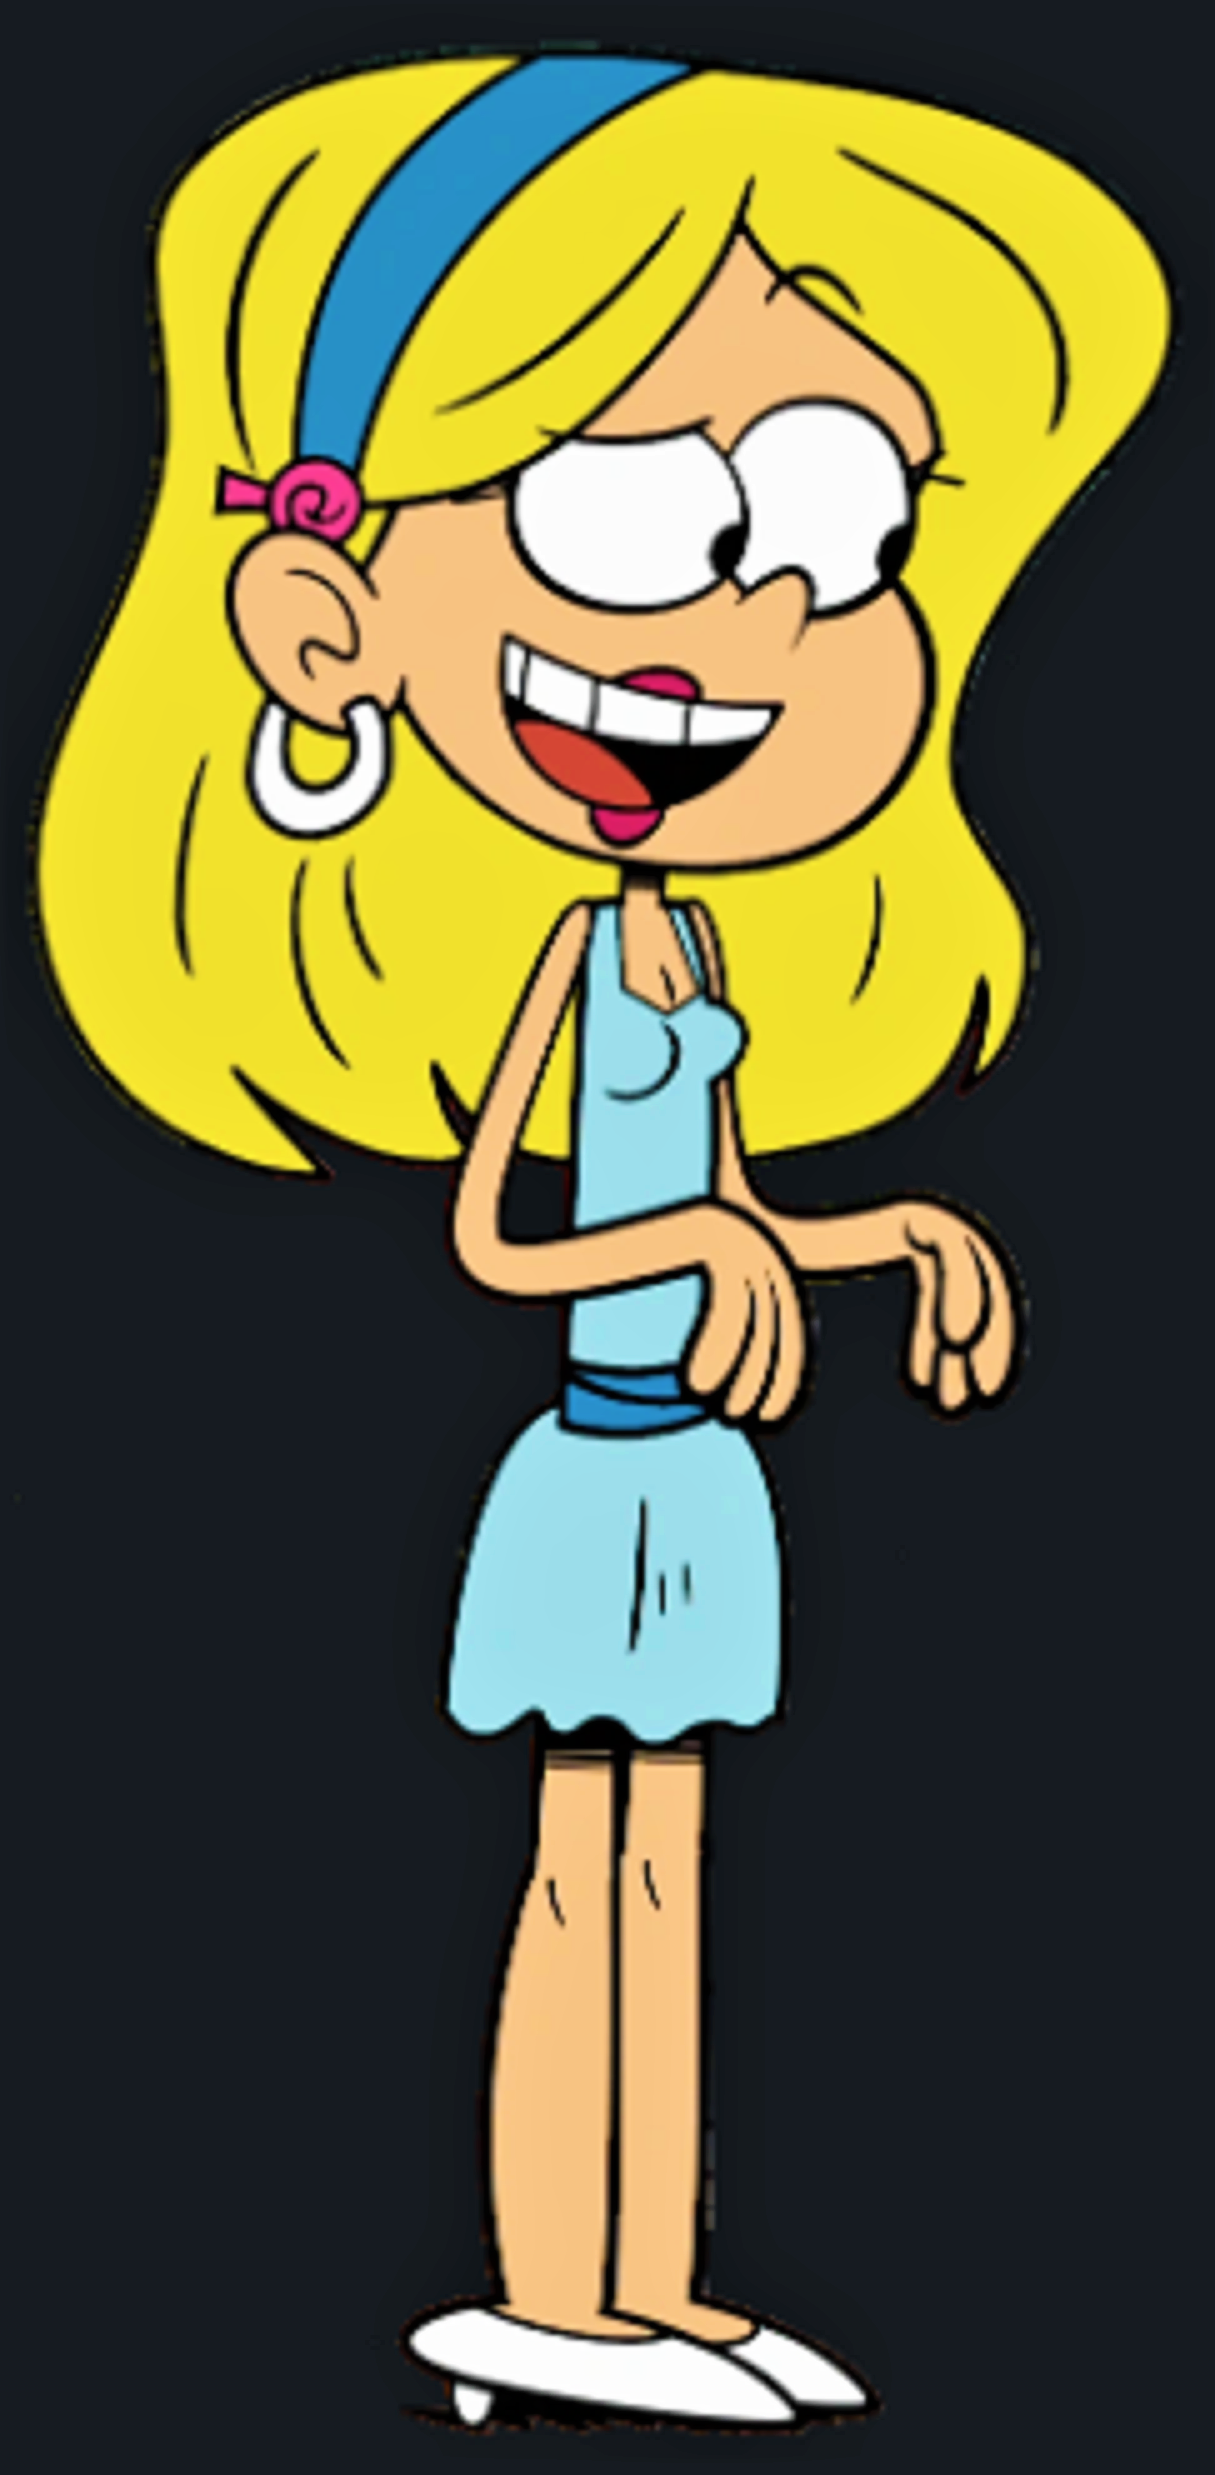 Lori Loud's Makeover by MMMarconi127 on DeviantArt